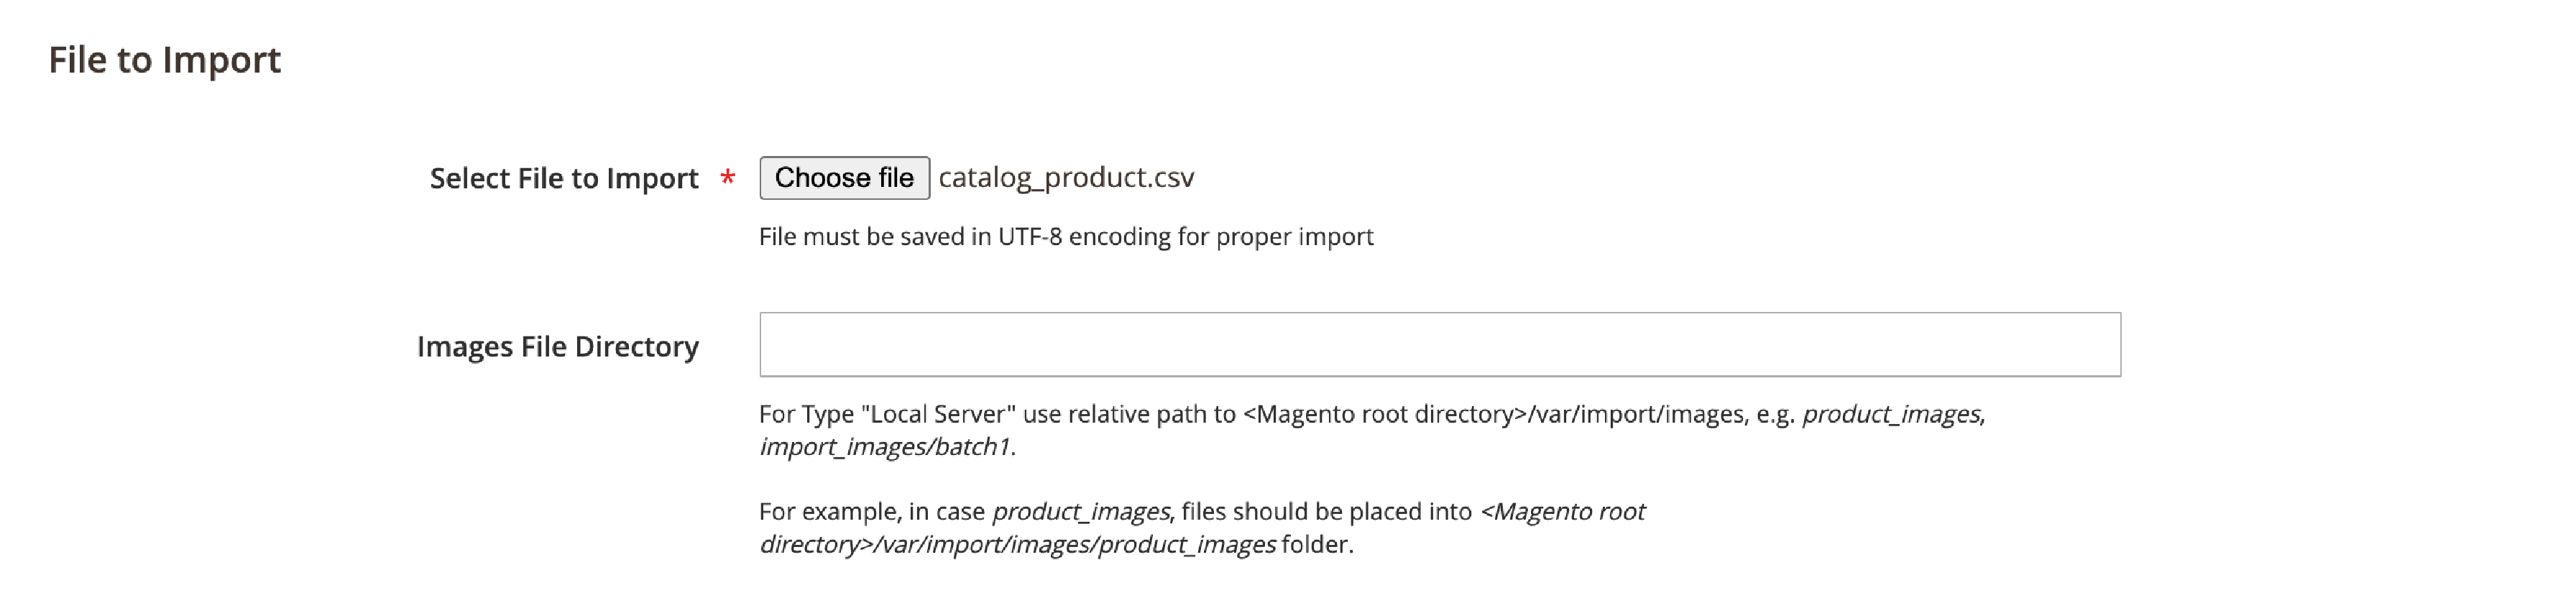 Magento 2 Admin Panel: Specifying the Import File